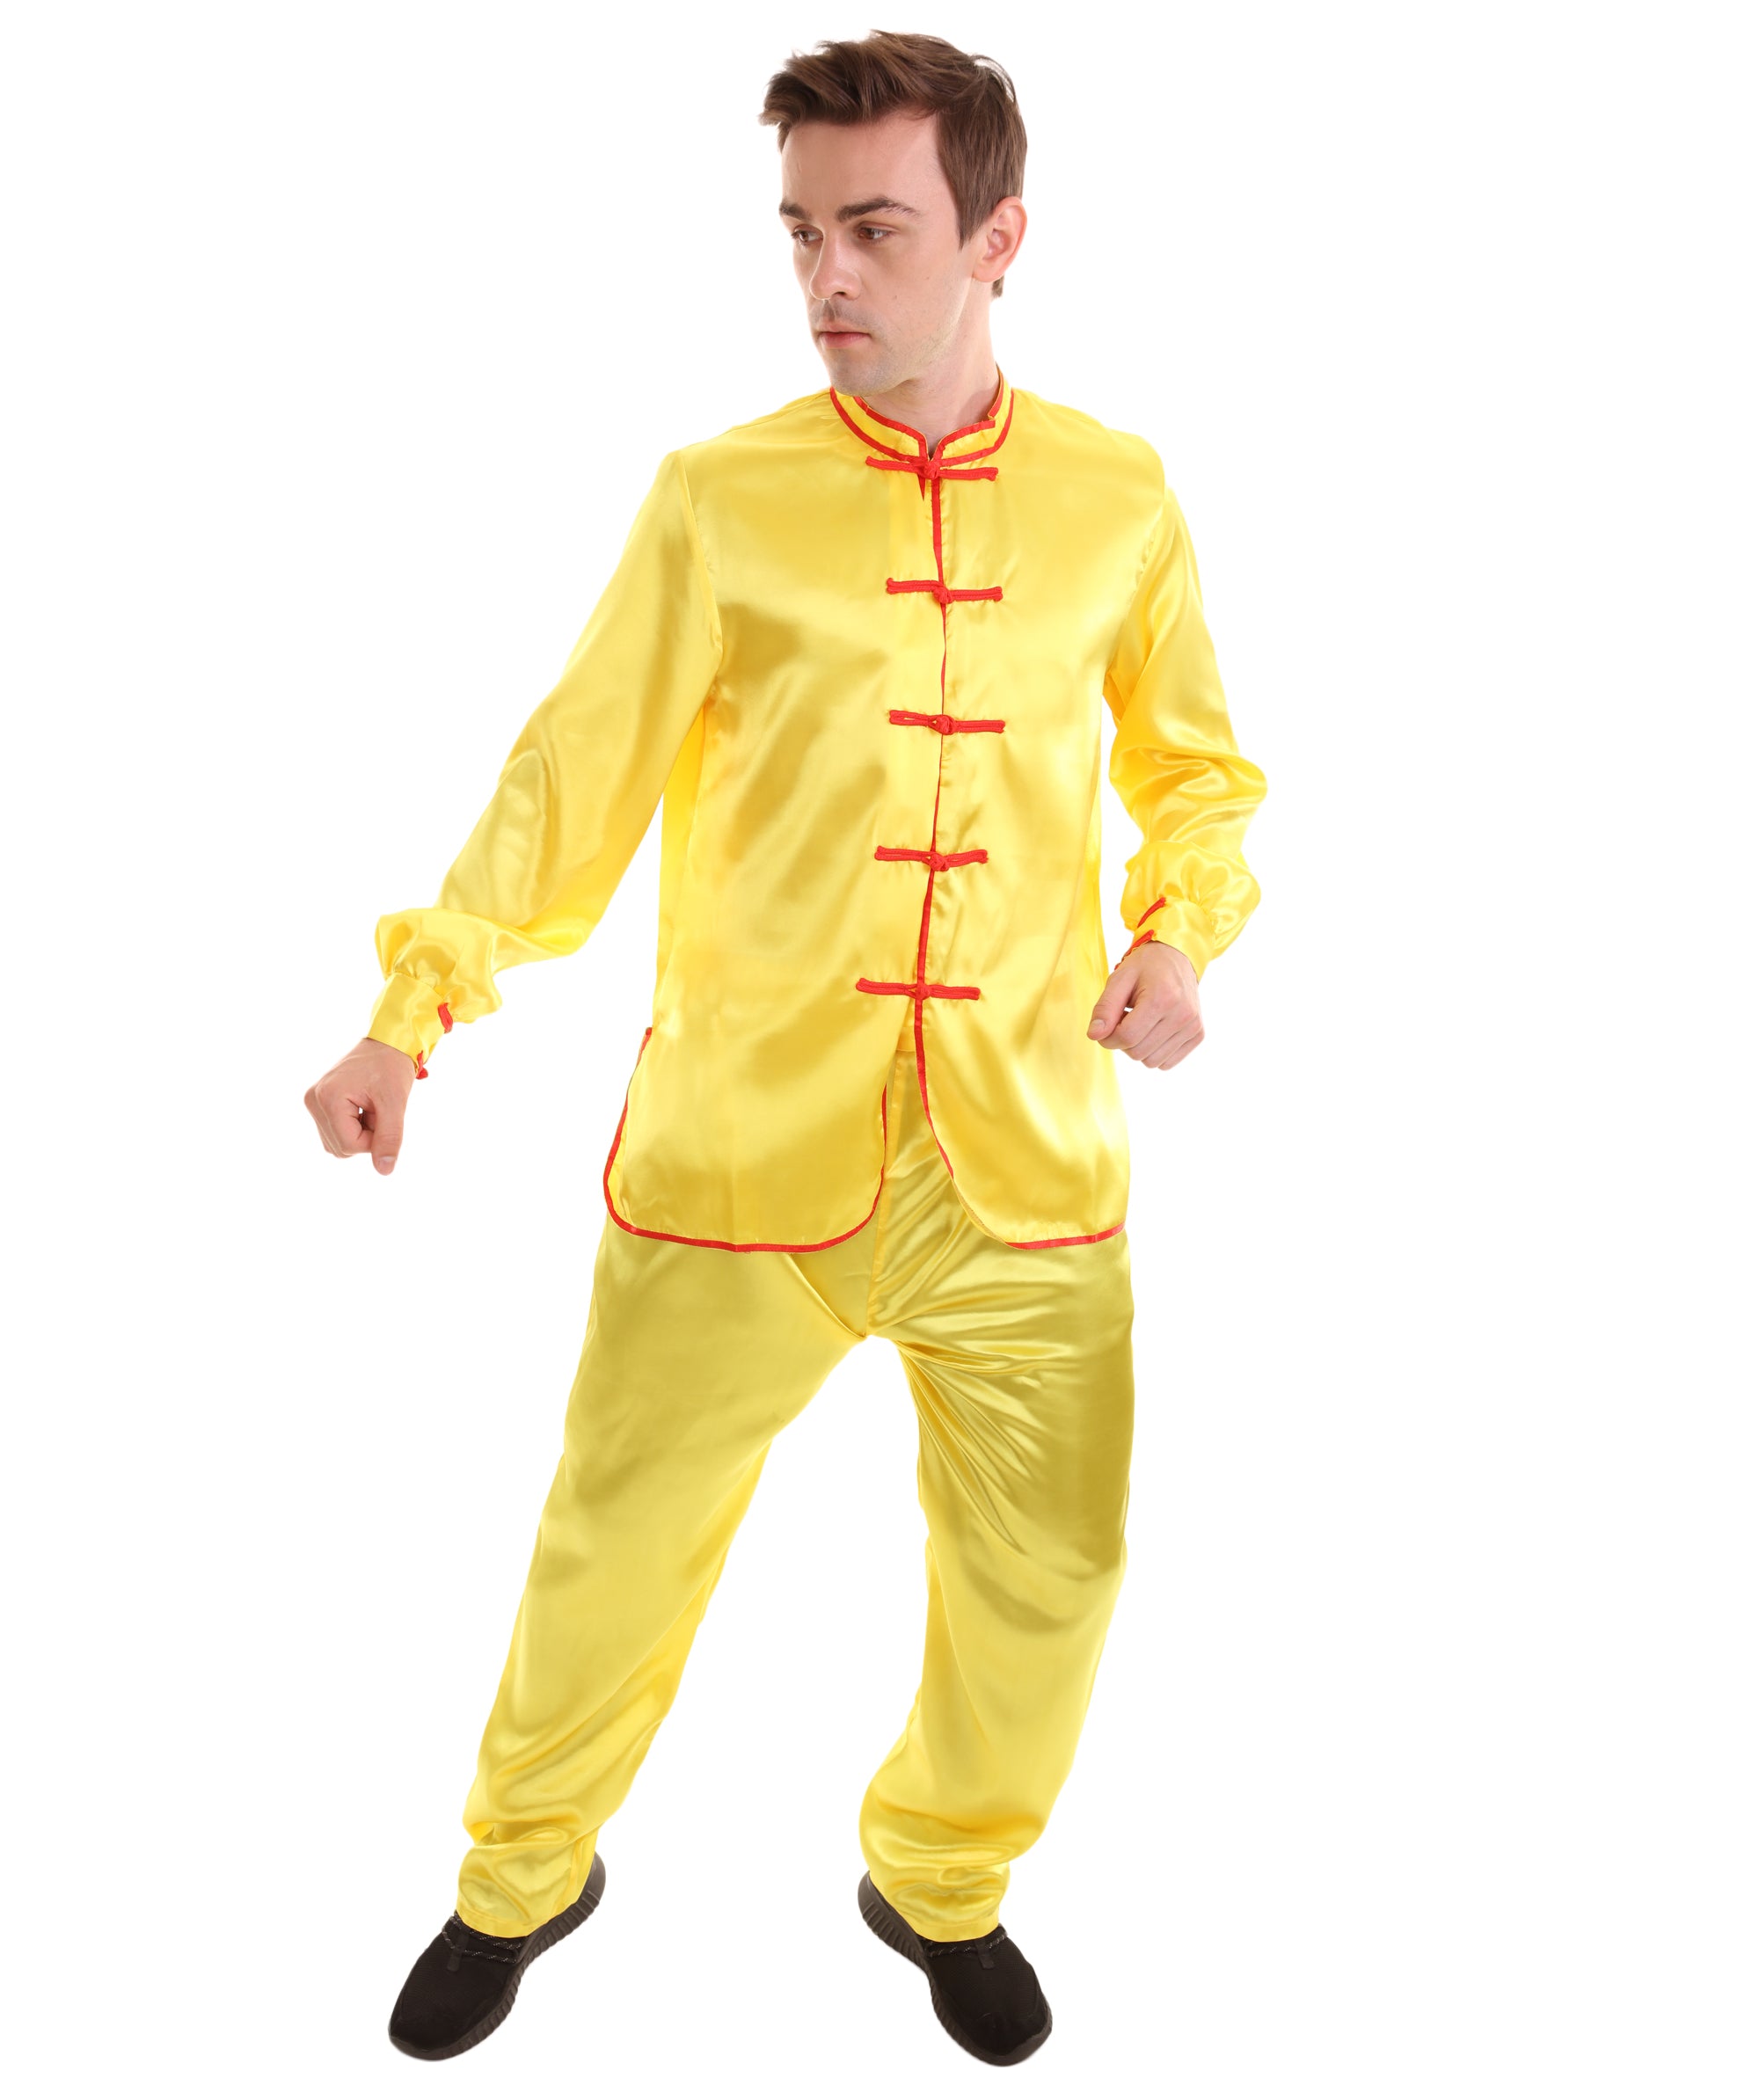 Adult Men's Chinese Traditional Kung Fu Costume | Multiple Color Optio